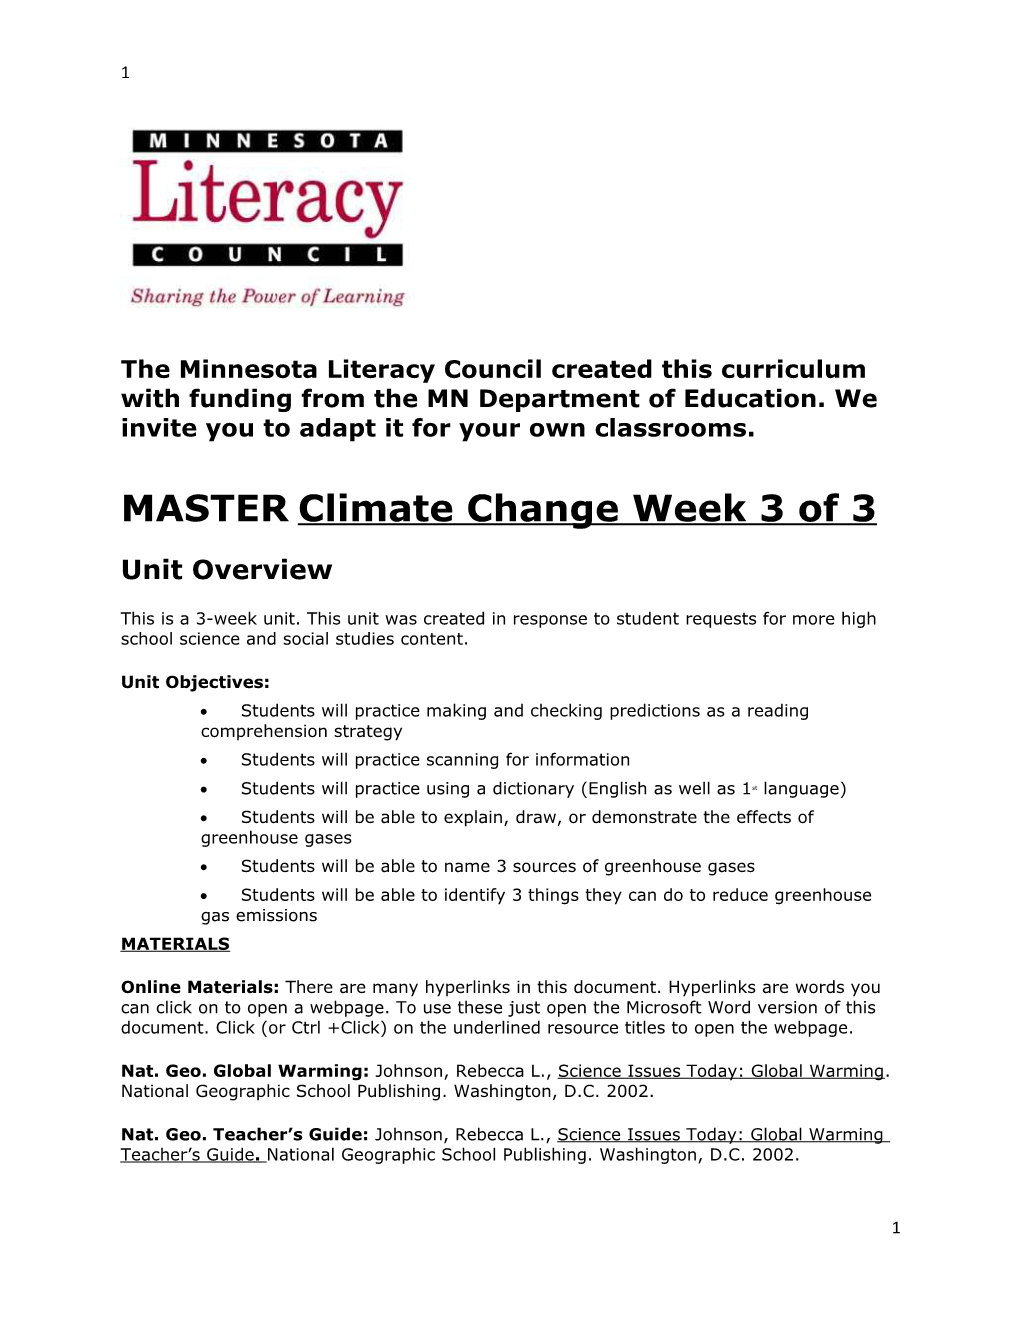 The Minnesota Literacy Council Created This Curriculum with Funding from the MN Department